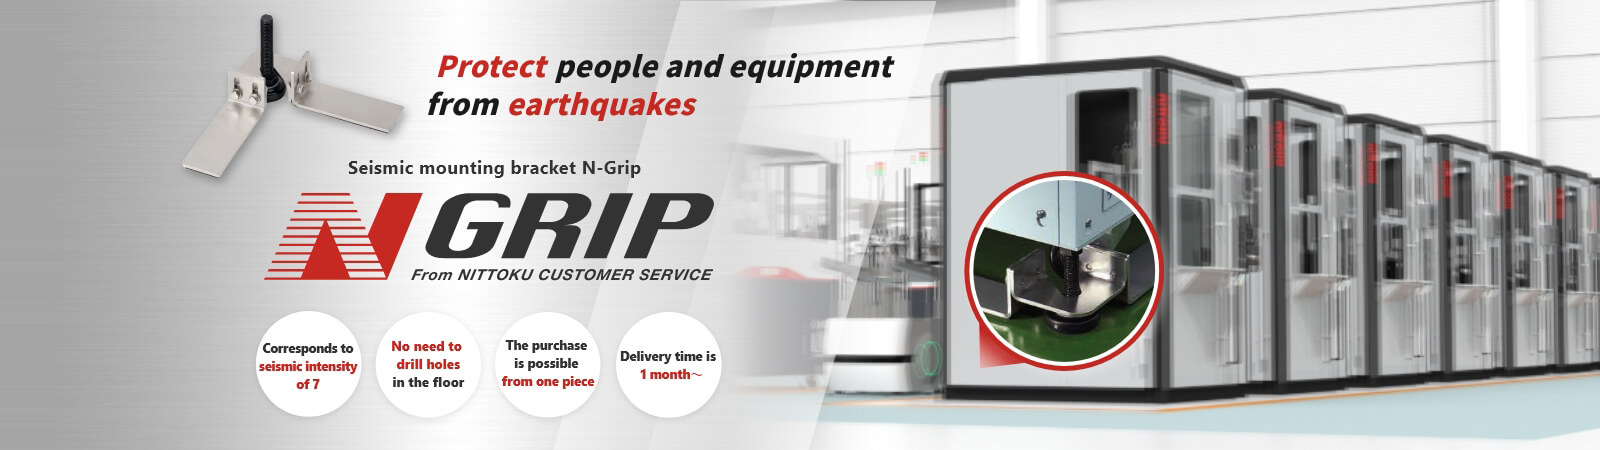 Protect people and equipment from earthquakes. Seismic mounting bracket N-Grip (Corresponds to seismic intensity of 7 / No need to drill holes in the floor / The purchase is possible from one piece / Delivery time is 1 month～)